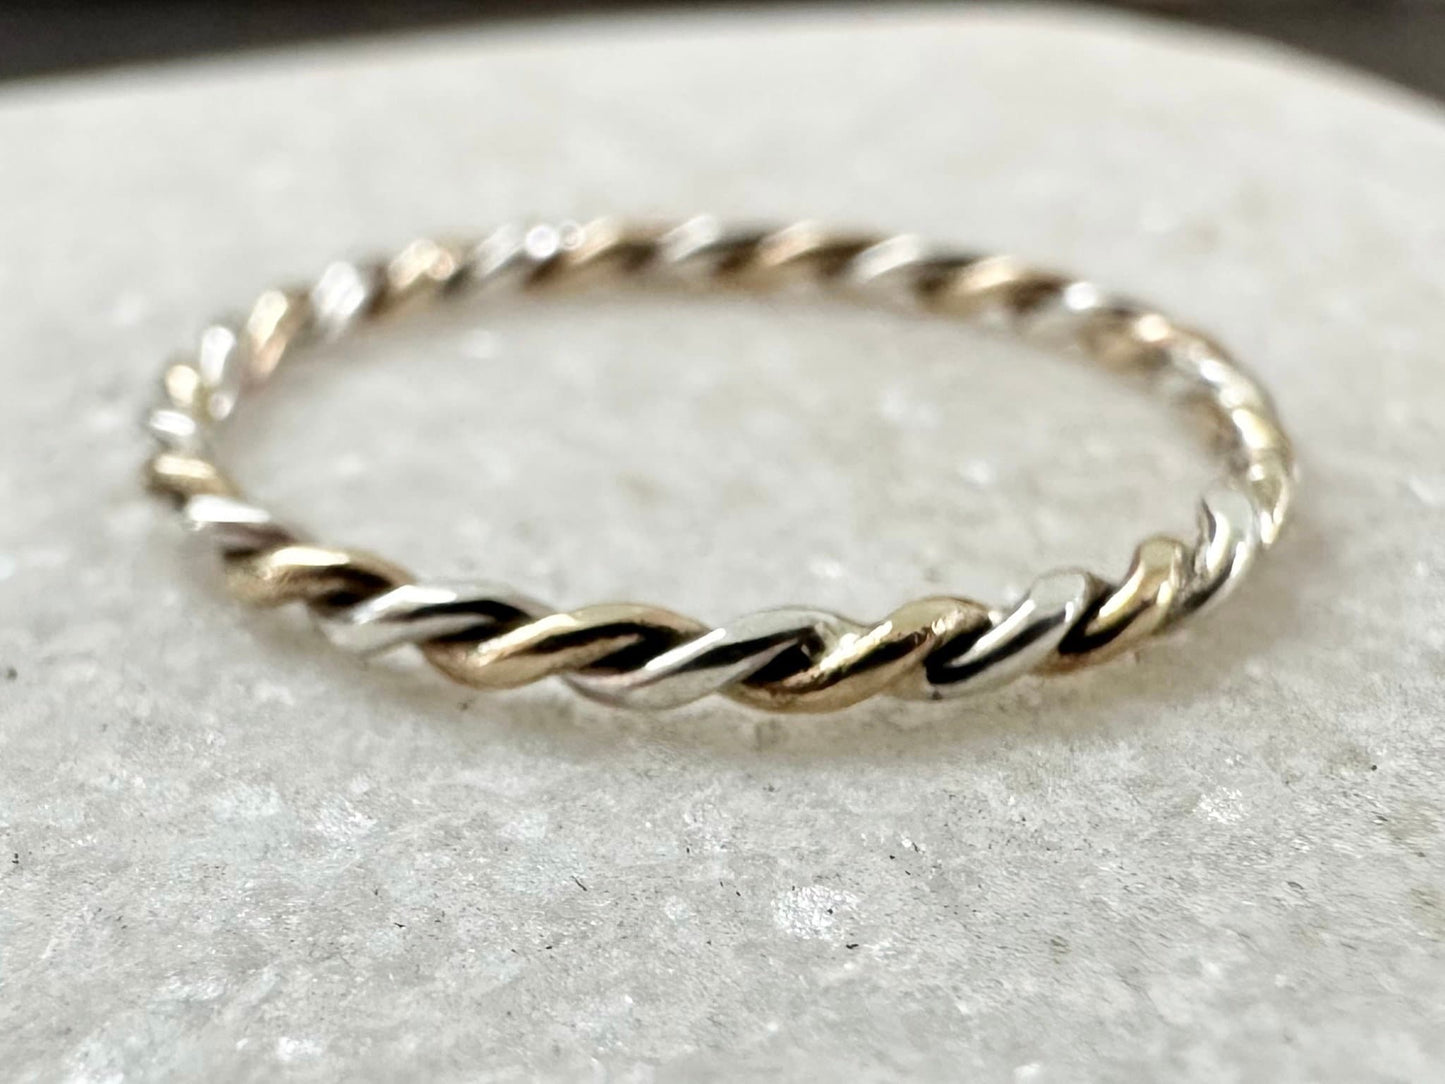 Solid 9ct Gold and Sterling Silver Ring, Mixed Metal Rope Ring, Twisted Ring, Handmade Precious Metal Stacking Ring.